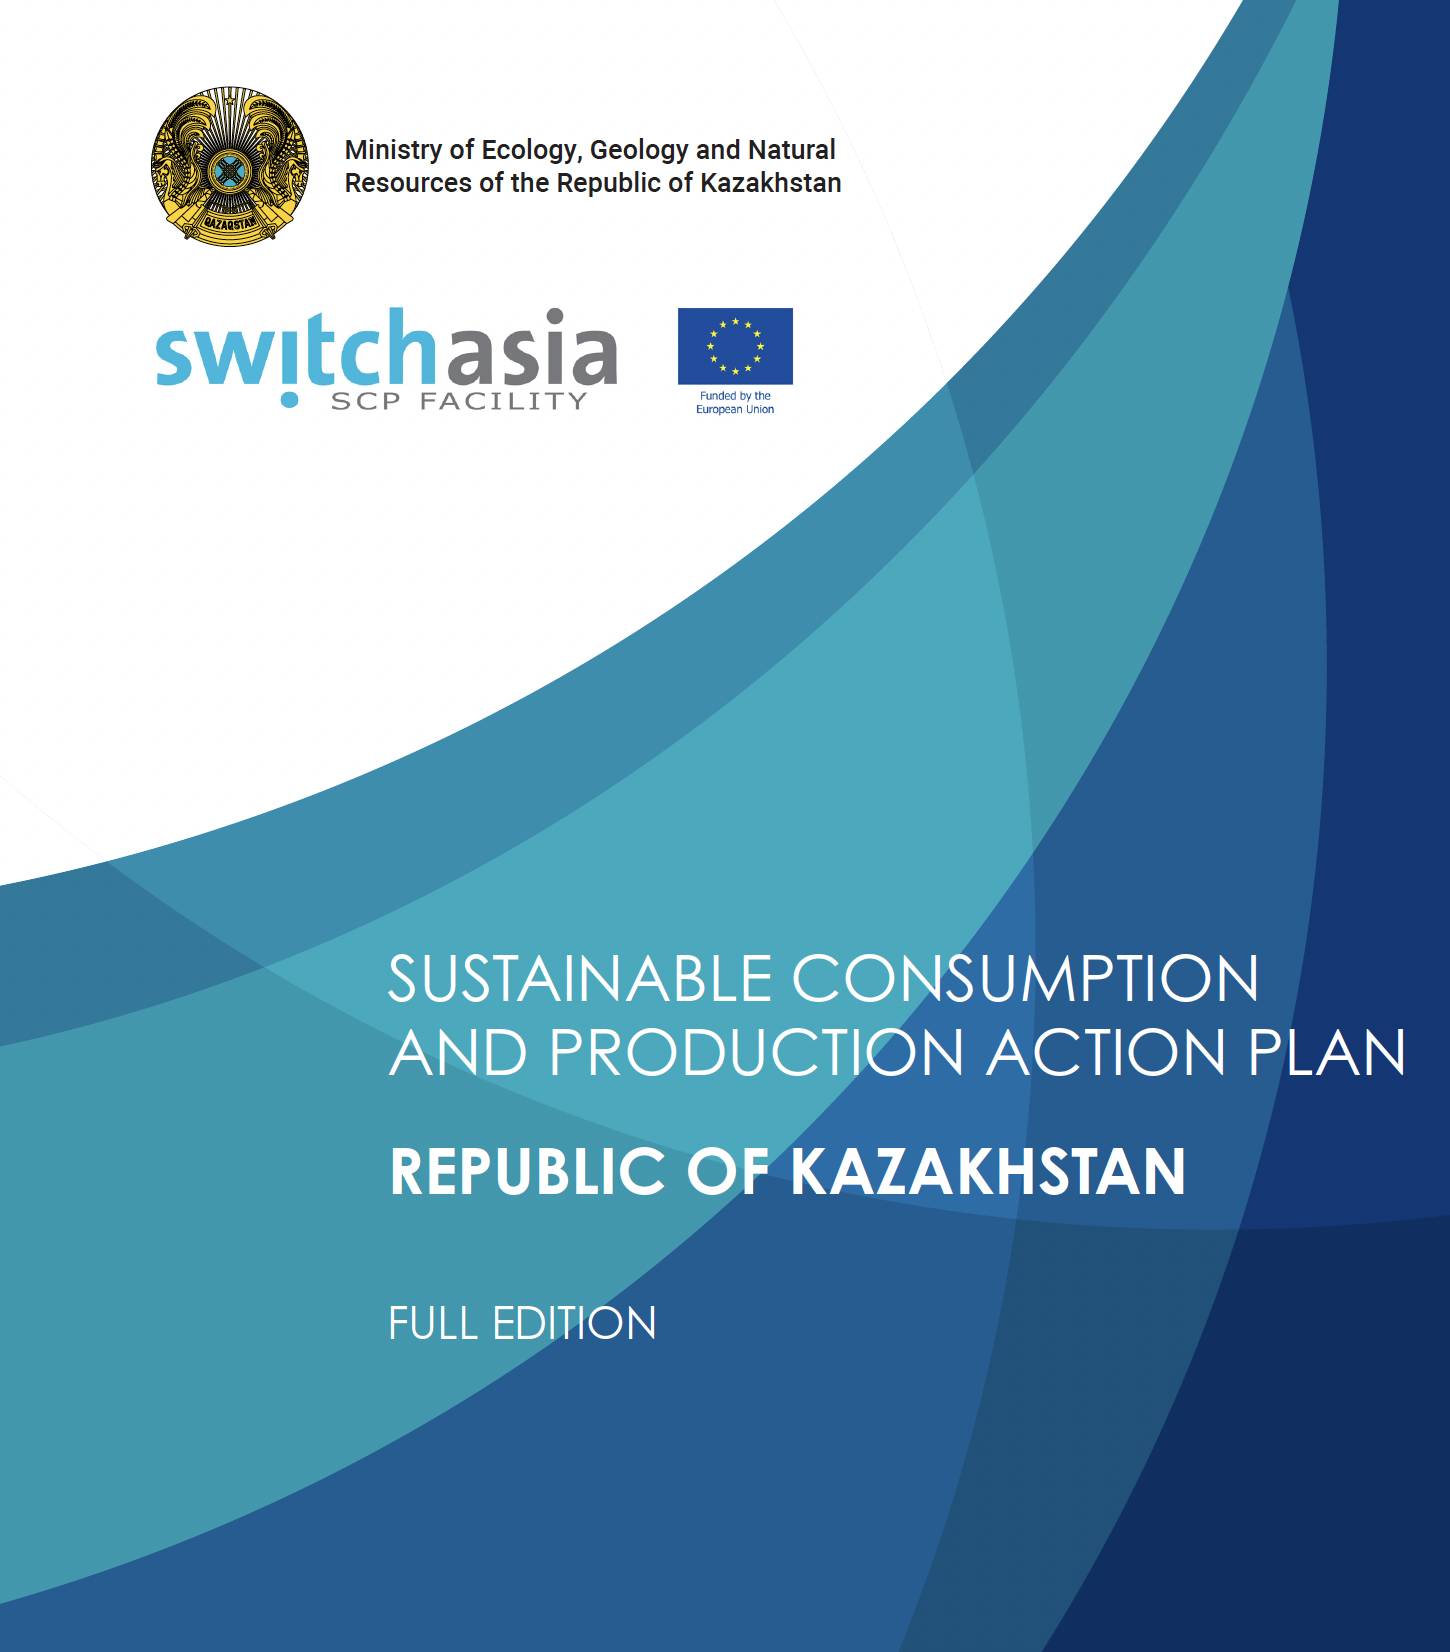 Sustainable Consumption and Production Action Plan for the Republic of Kazakhstan